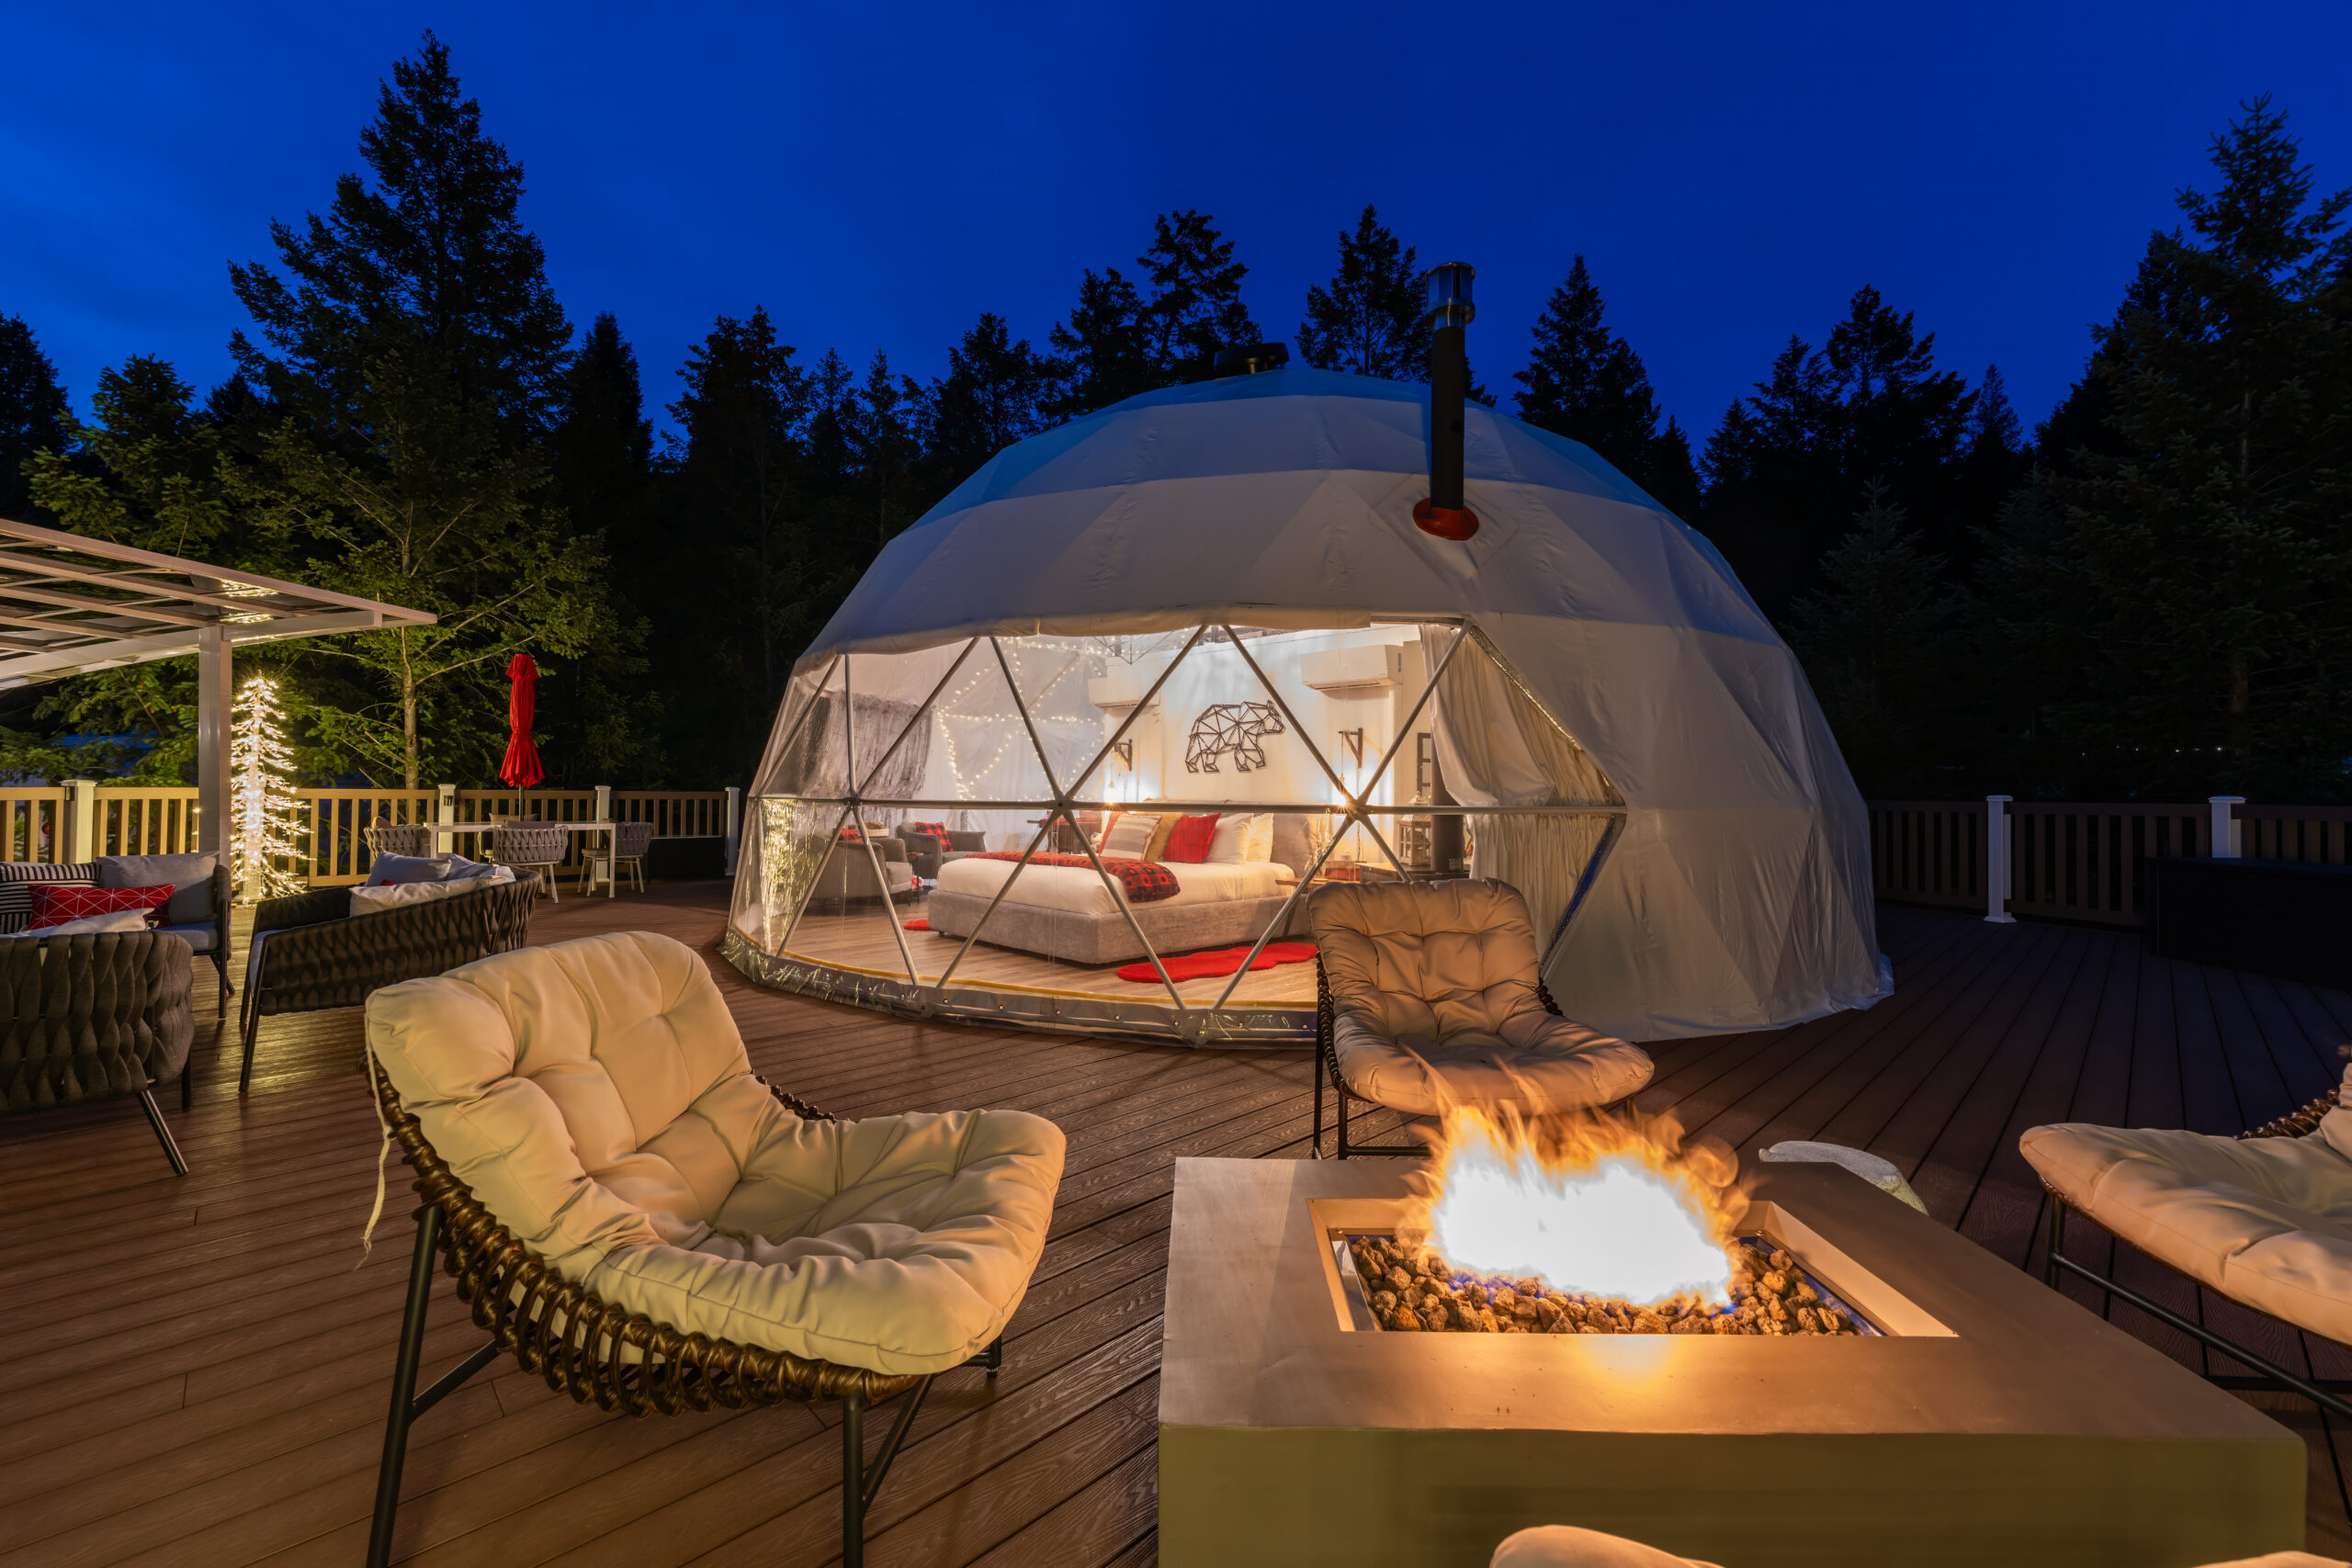 Fall in love with Winderdome Resort